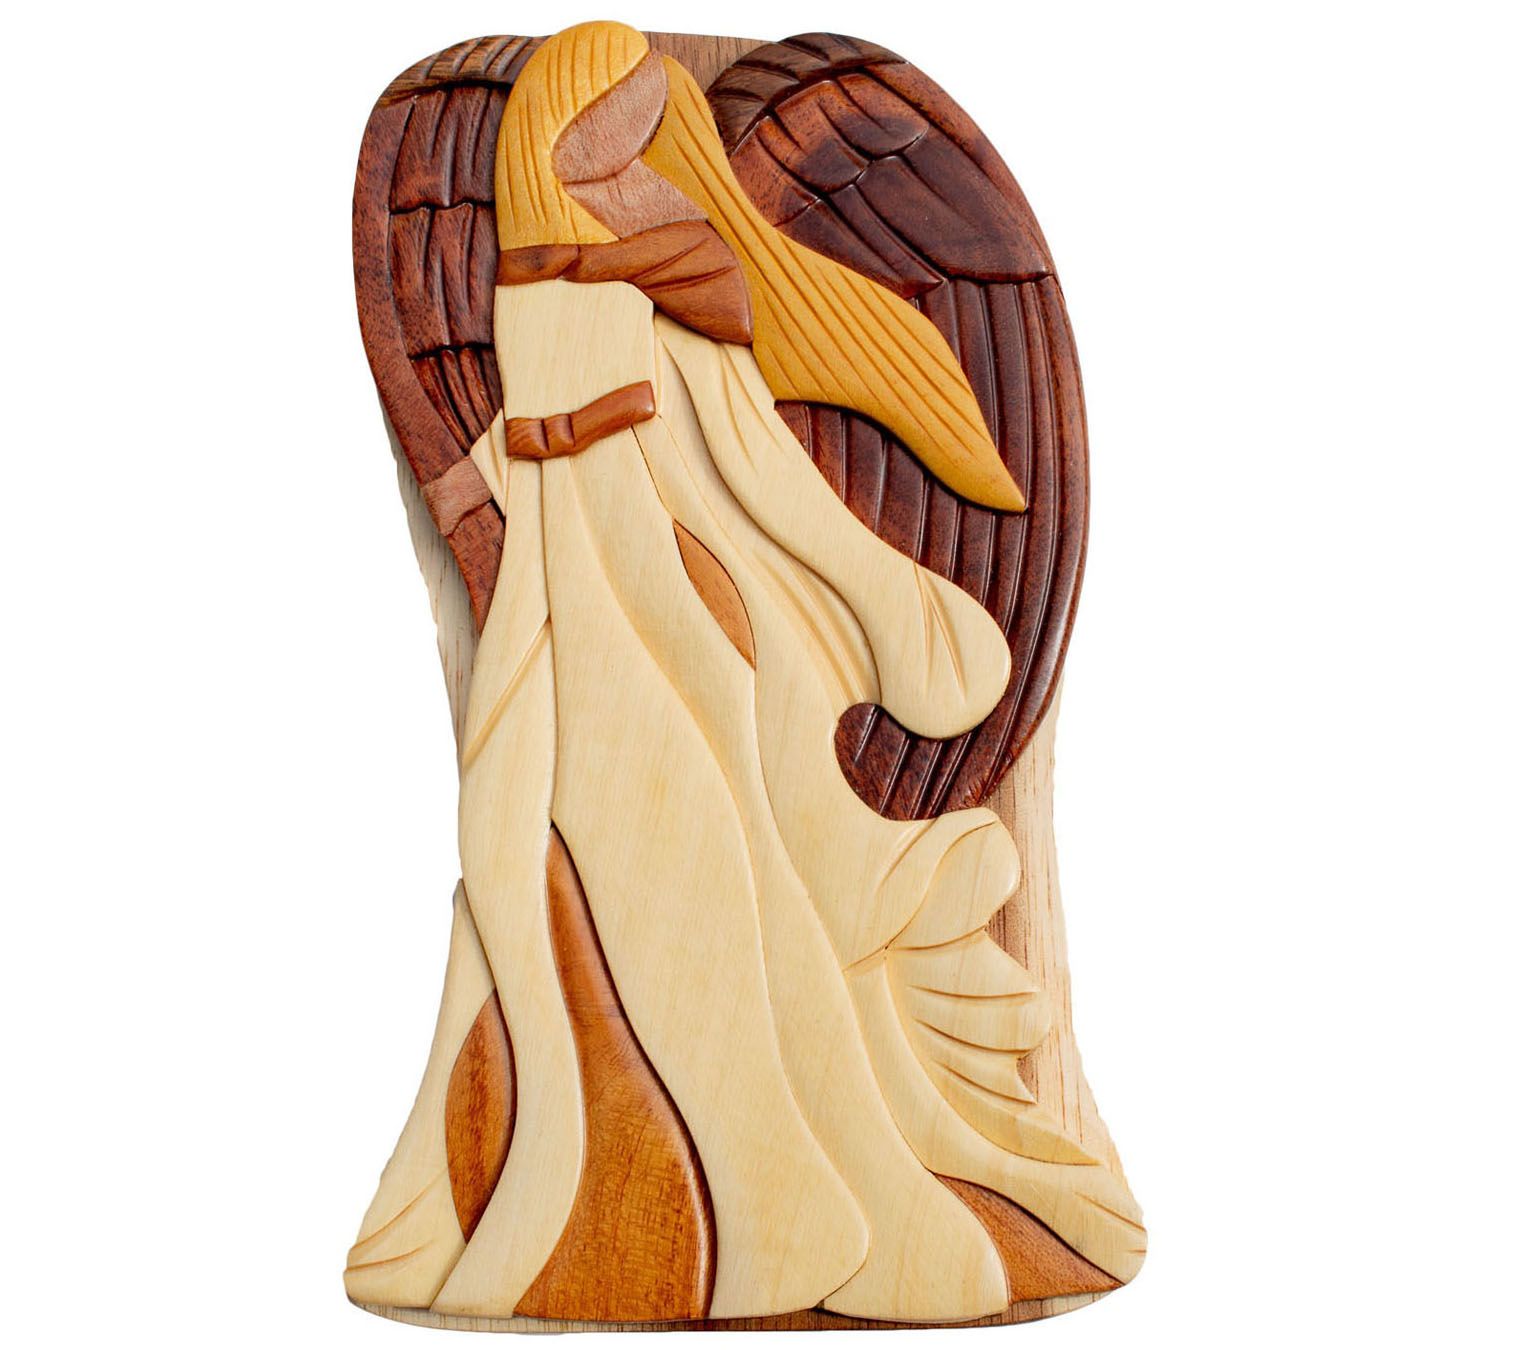 Carver Dan's Blonde Angel Puzzle Box with Magnet Closures